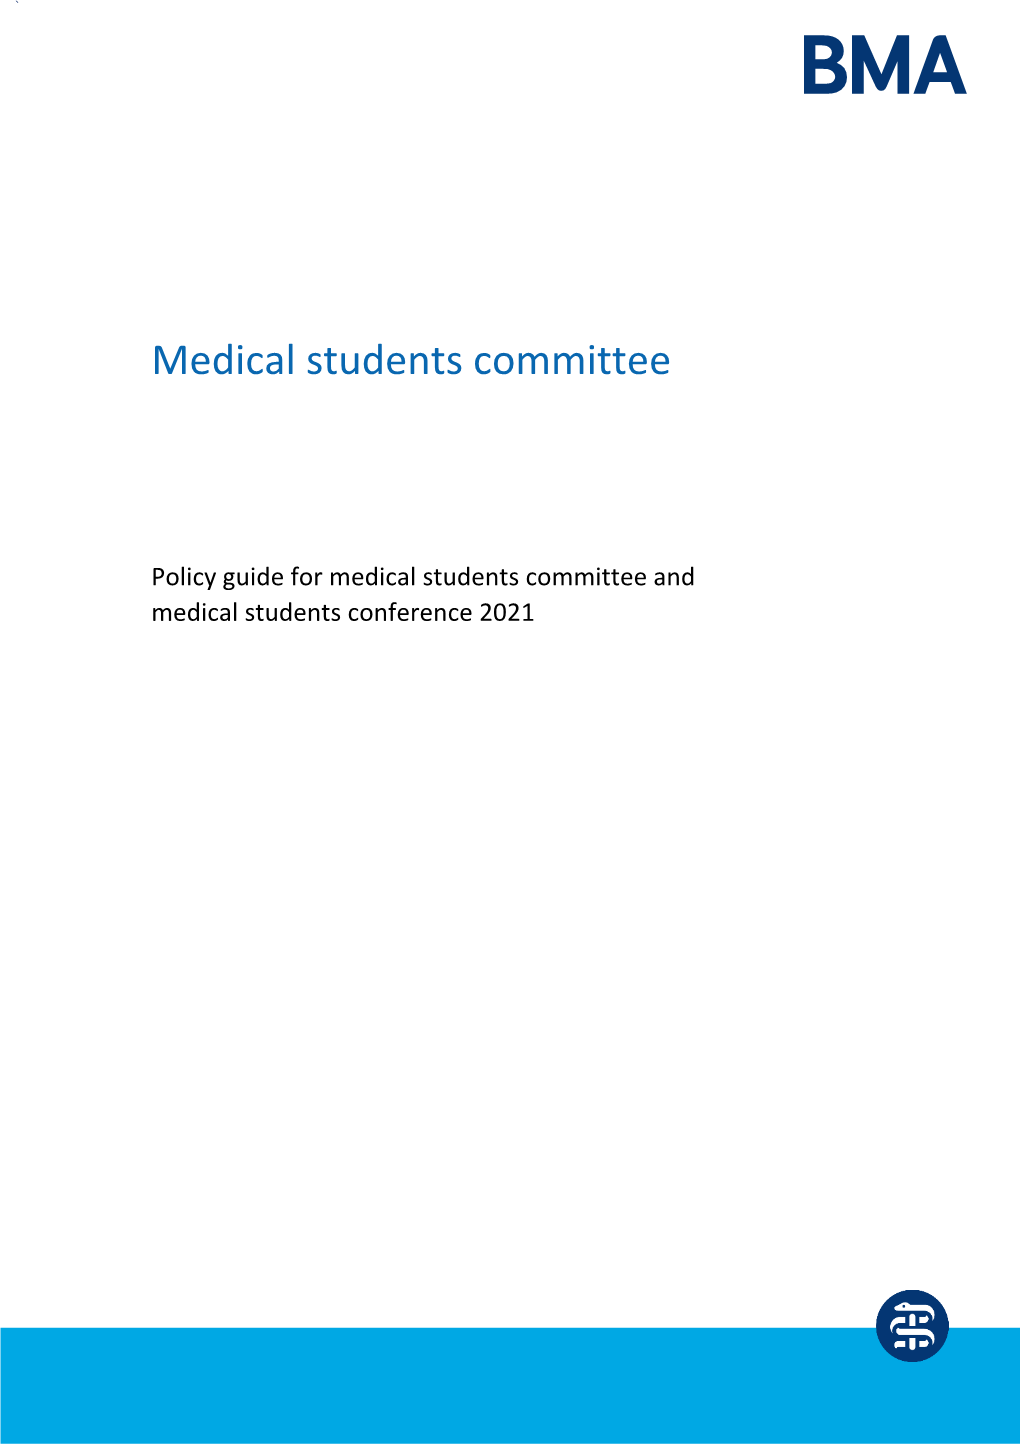 Medical Students Committee